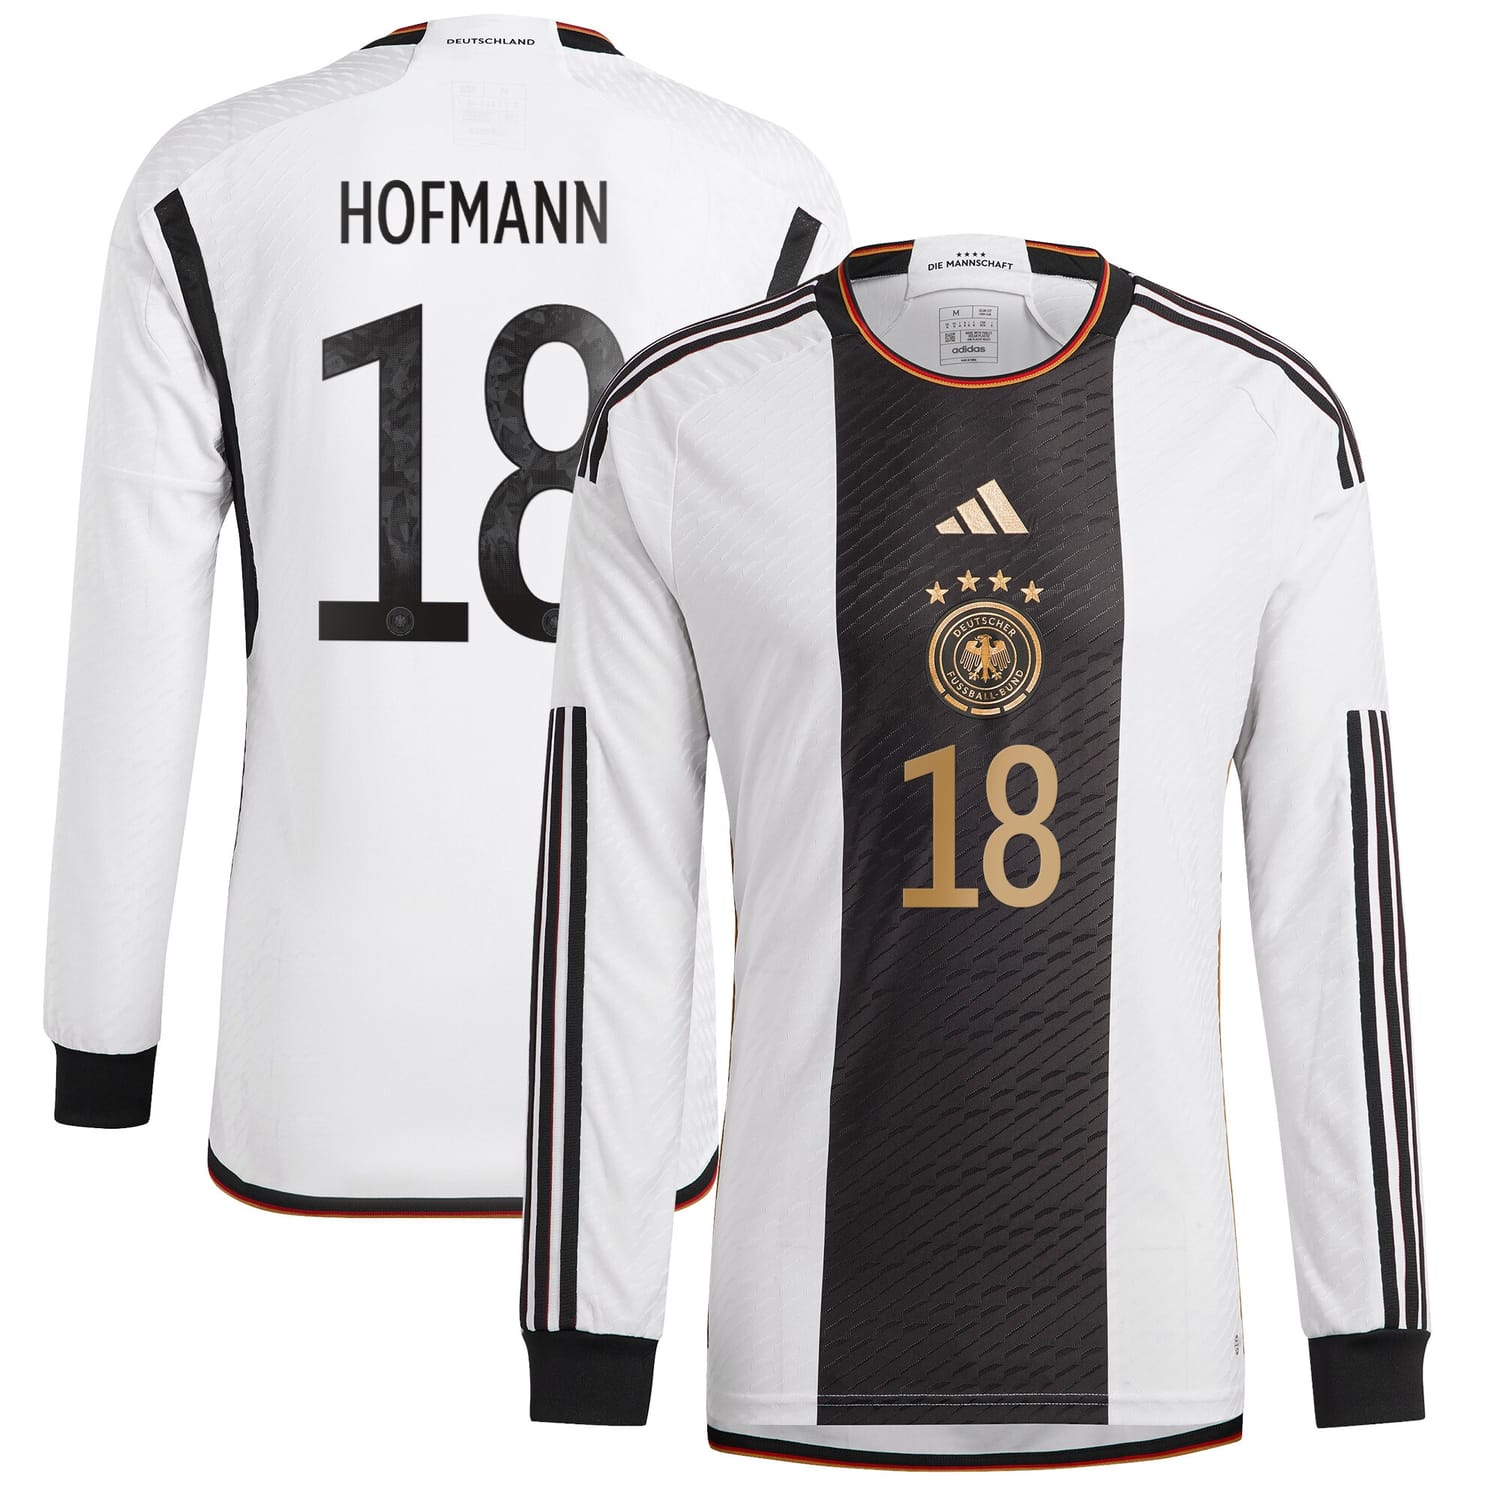 Germany National Team Home Authentic Jersey Shirt Long Sleeve player Jonas Hofmann 18 printing for Men